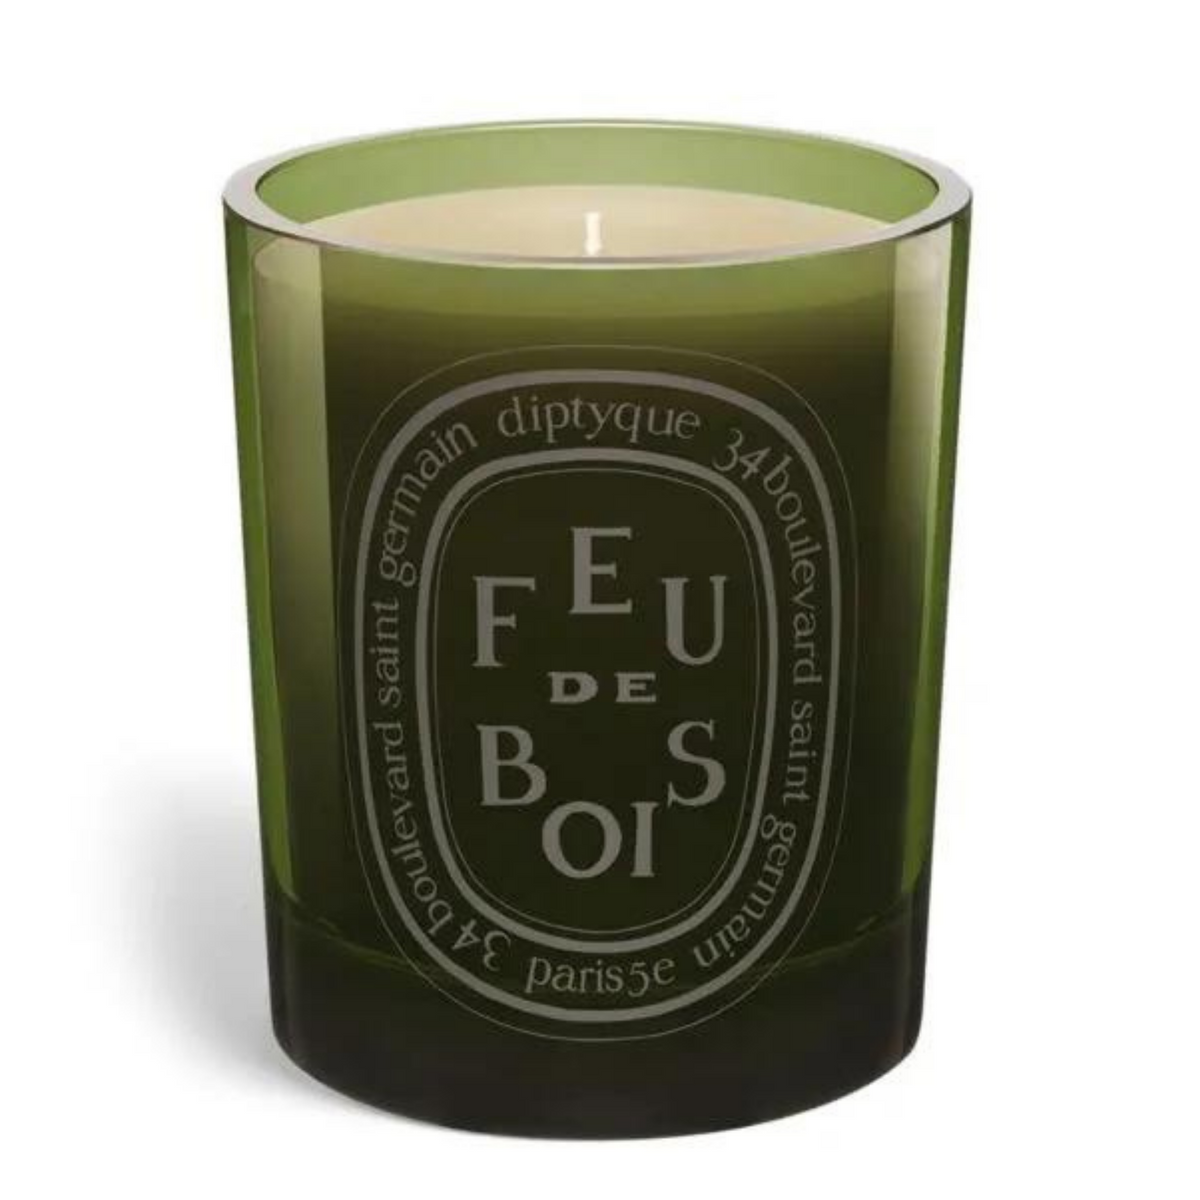 Primary image of Silver Feu De Bois (Firewood) Candle